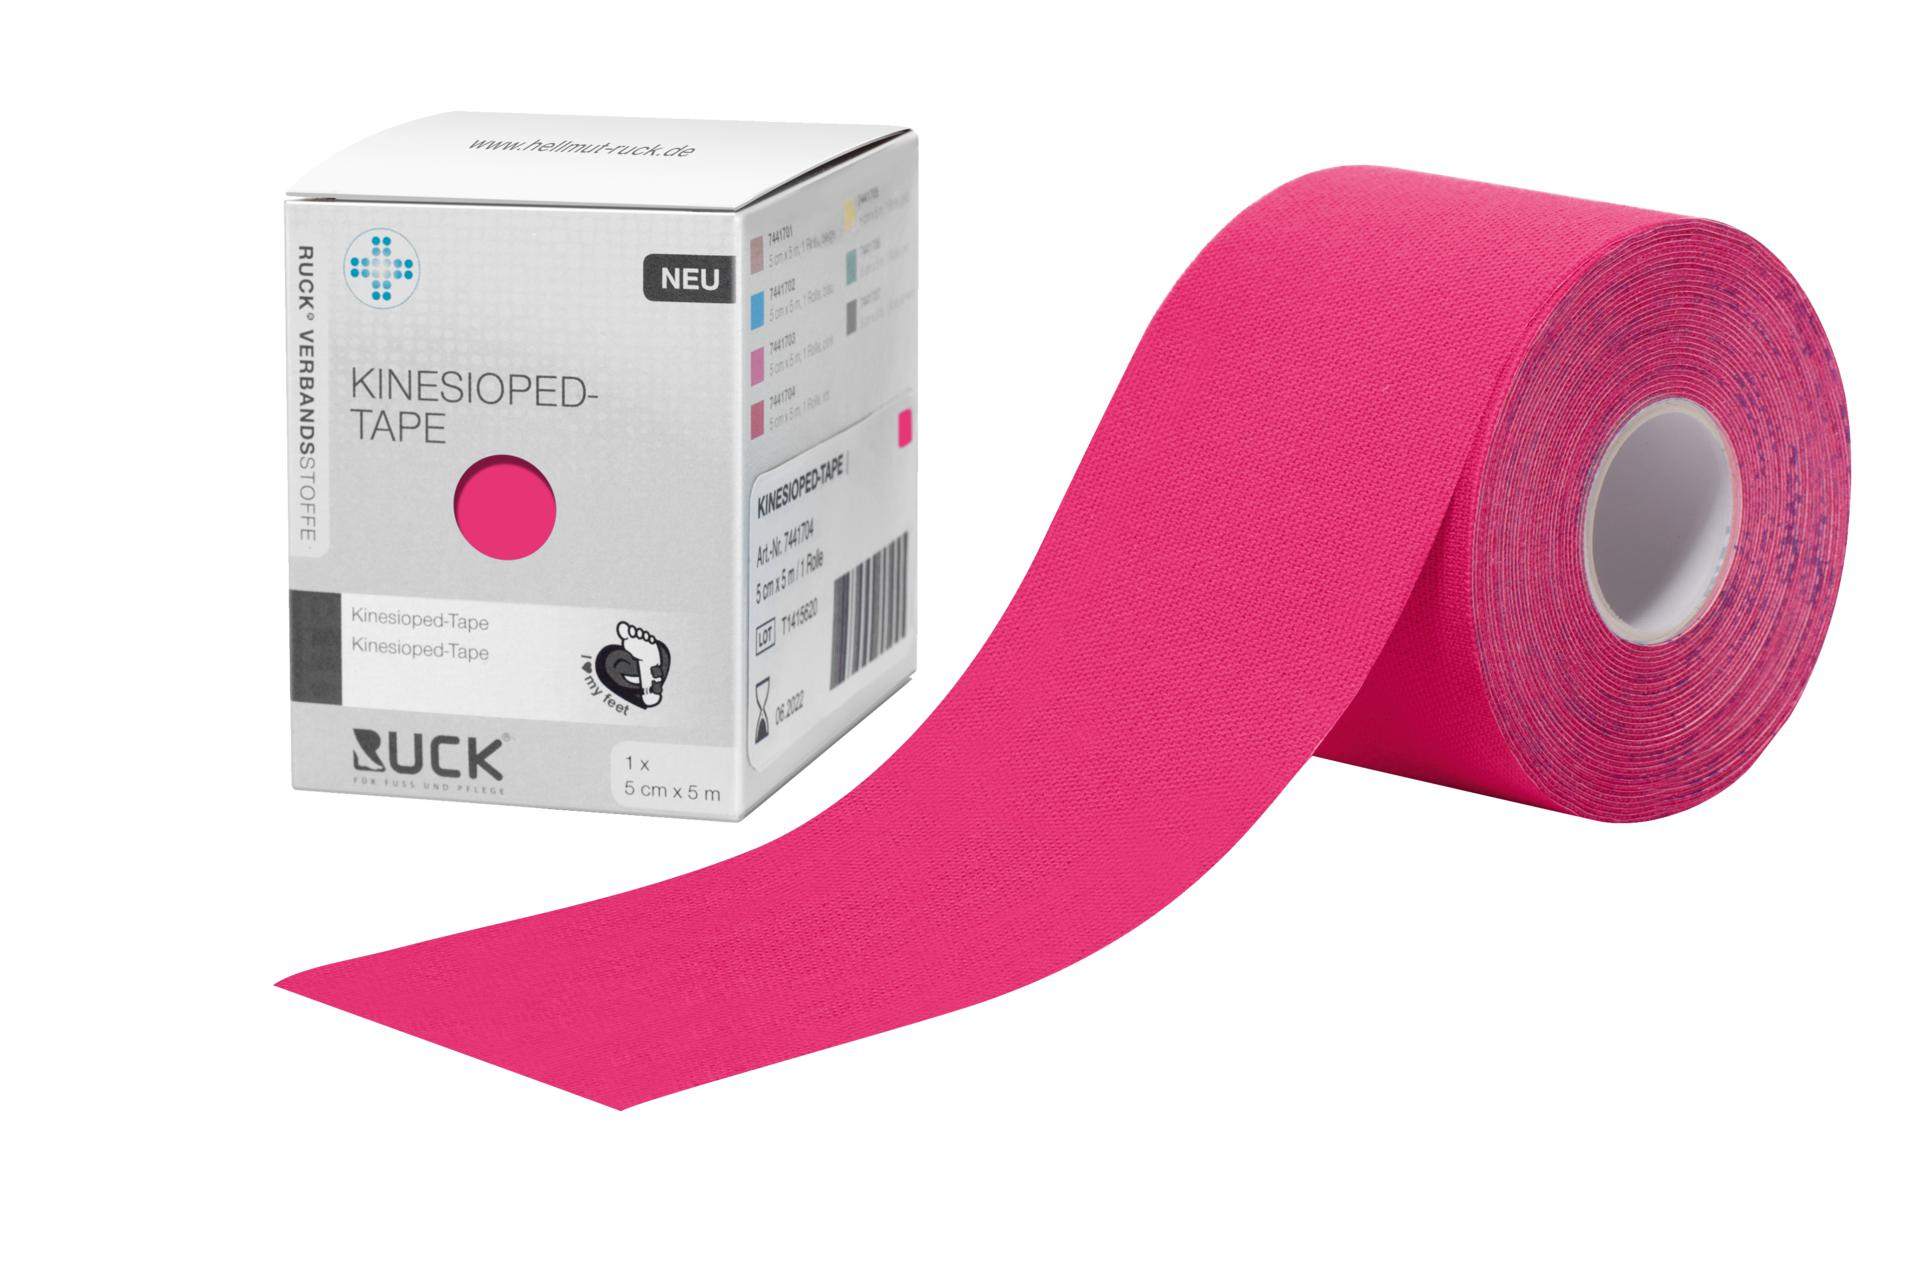 KINESIOPED-Tape 5 cm x 5 m, 1 Rolle rot